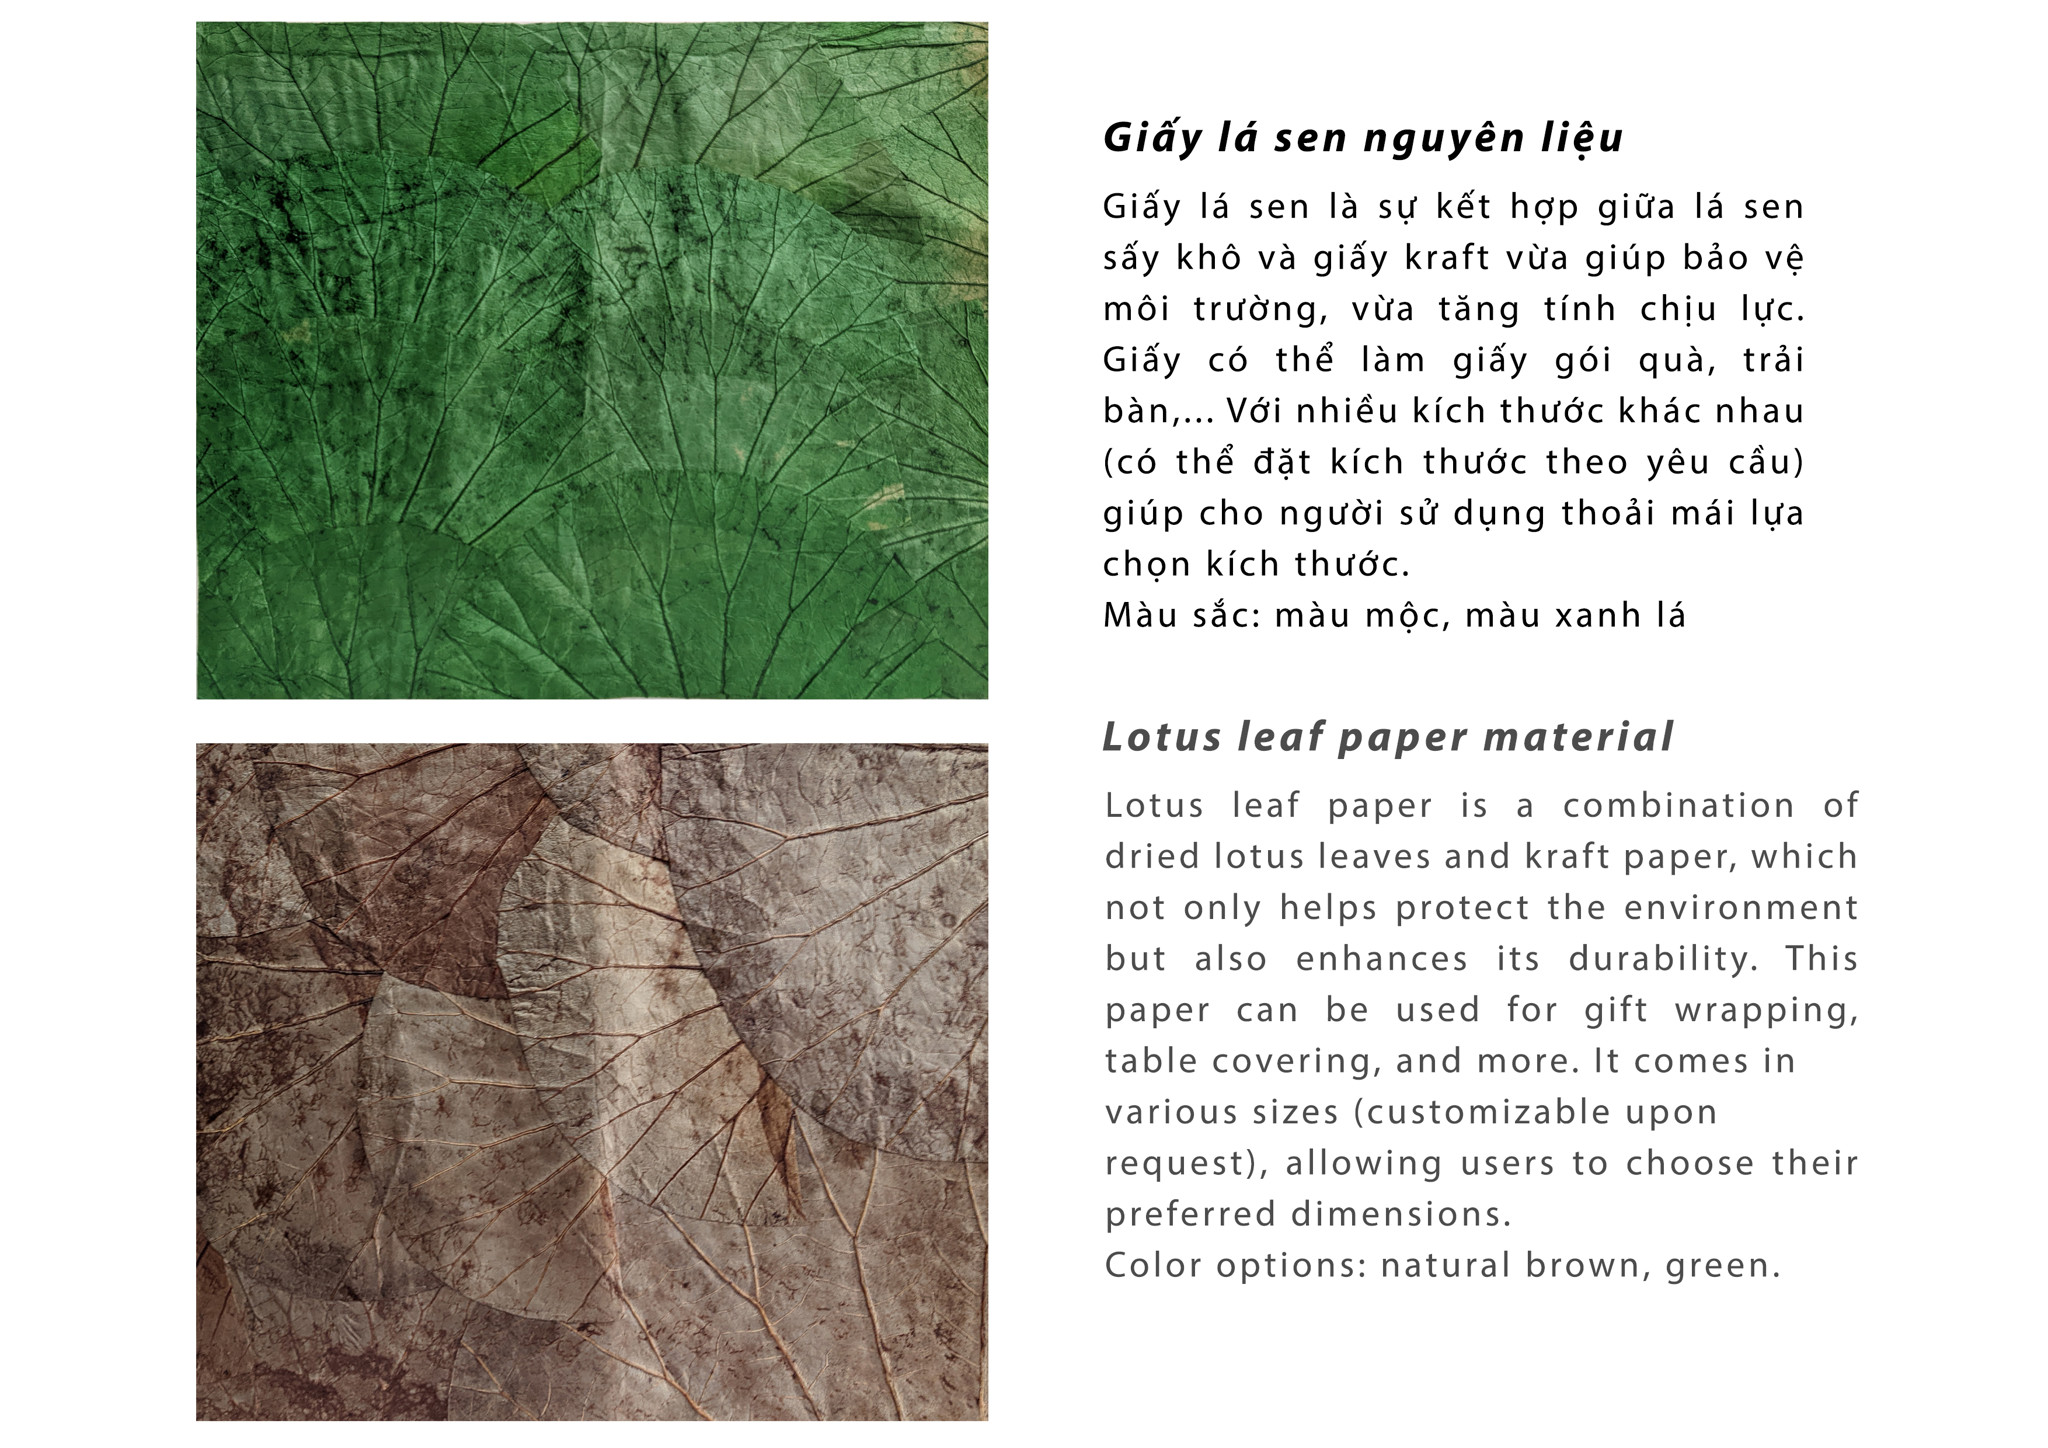 🌿 Ecolotus Lotus Leaf Paper - Nature's Beauty in Every Sheet! 🎁